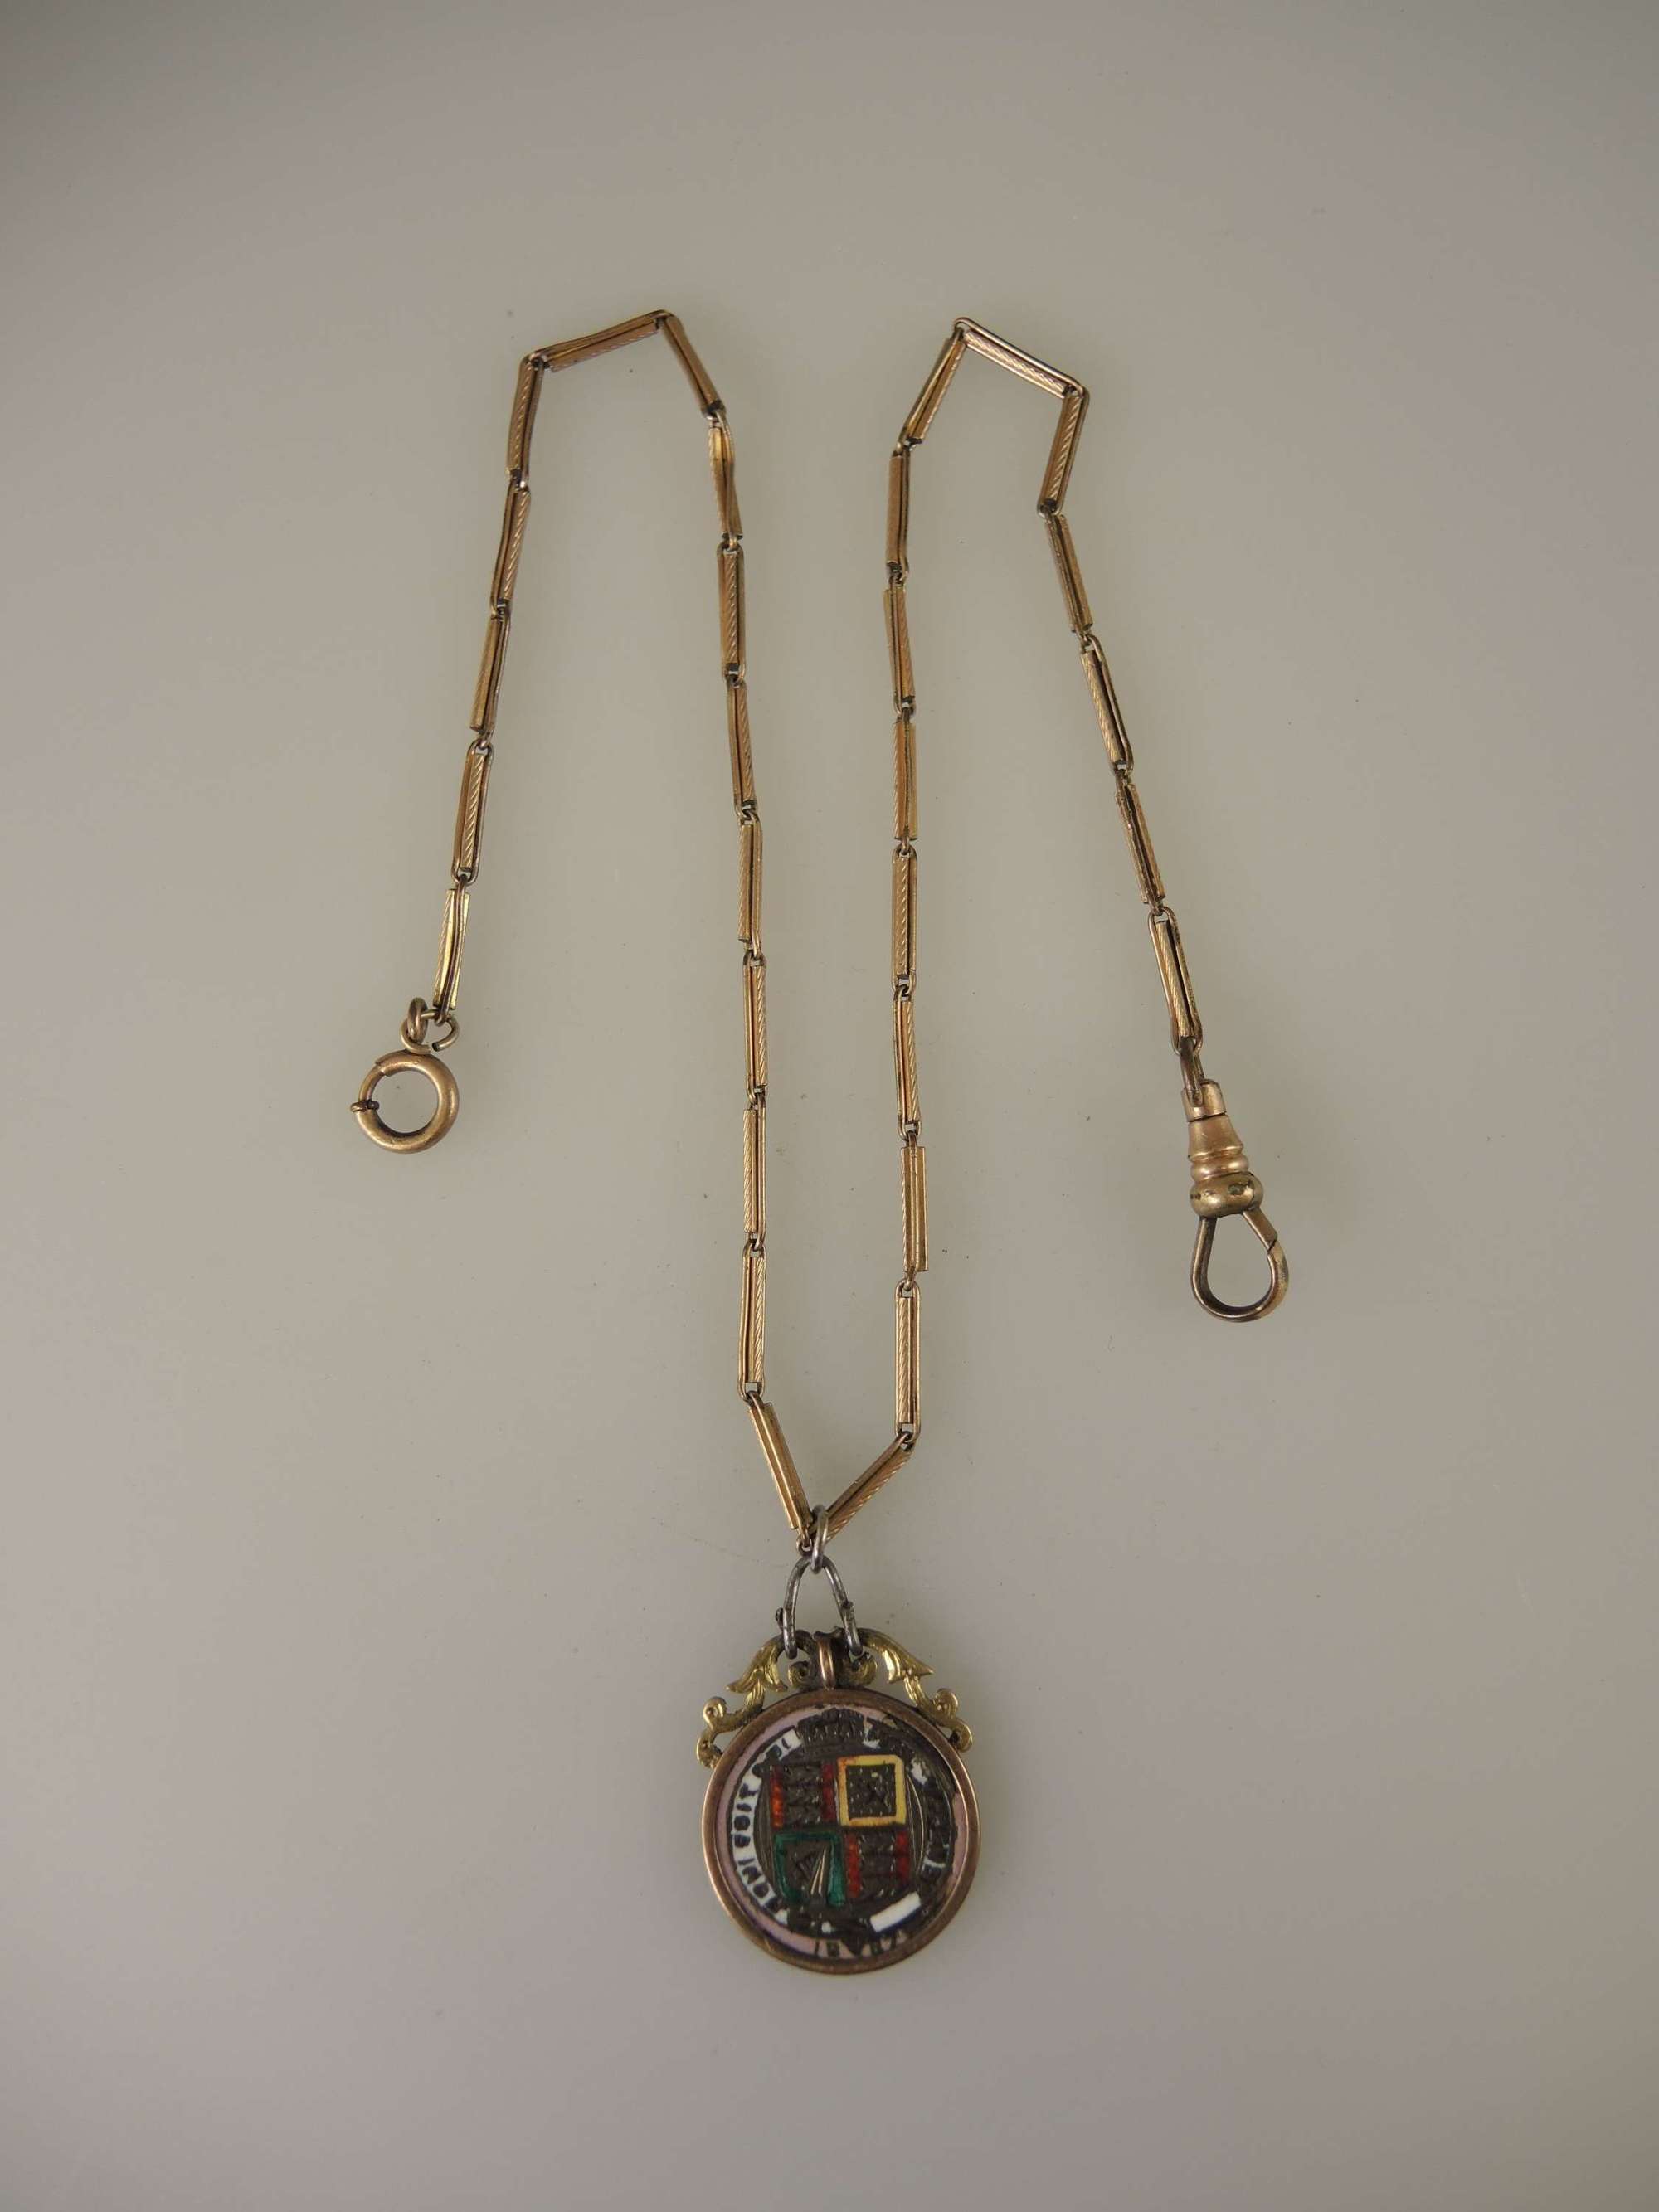 Single pocket watch chain with an enamel coin fob c1890